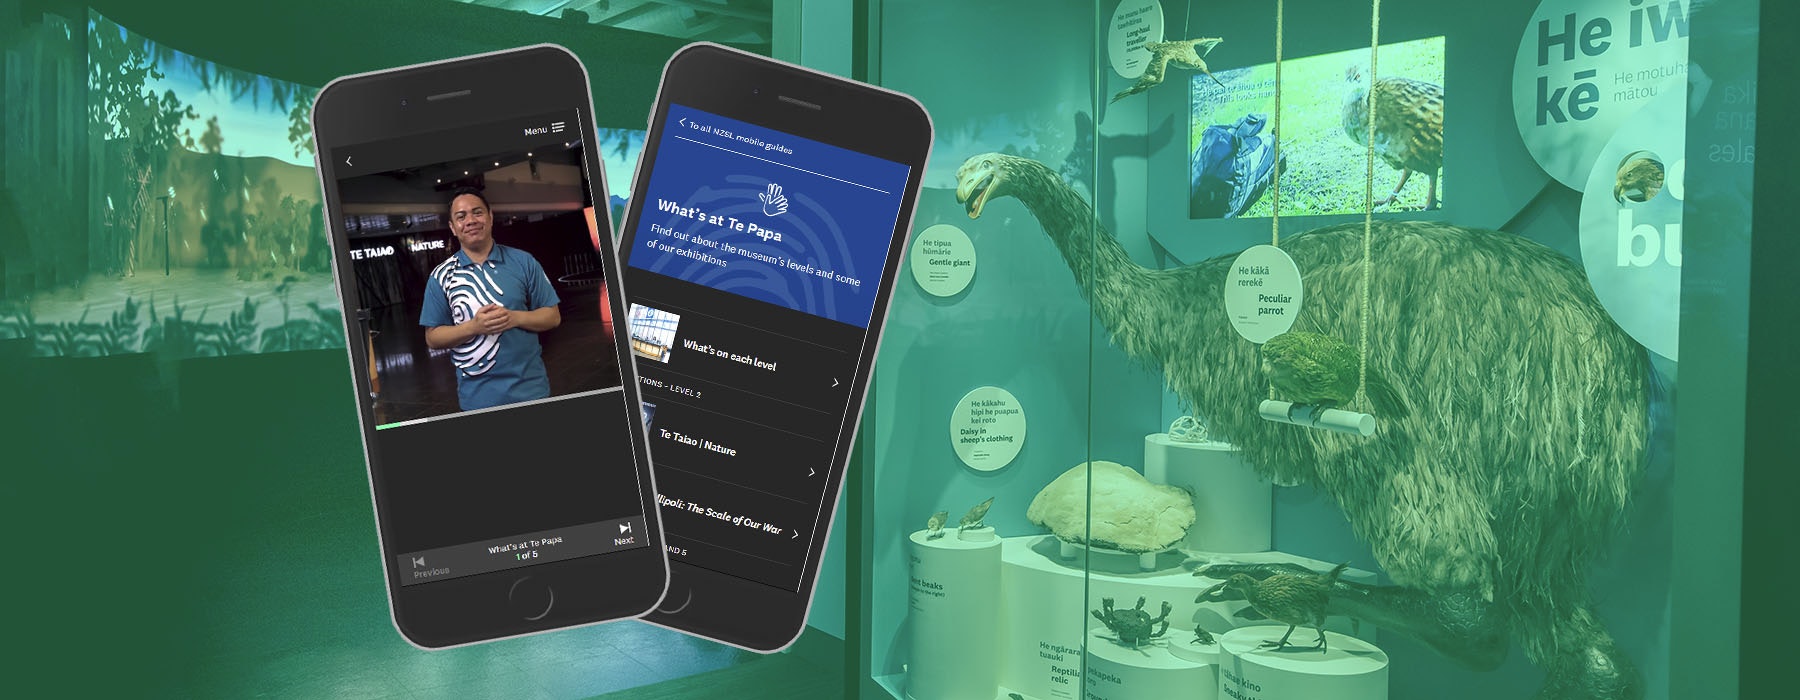 View of the entrance area of Te Taiao Nature, with a moa in a case on the right and a large projected animation on the left. Two phones are superimposed on top displaying the mobile guide